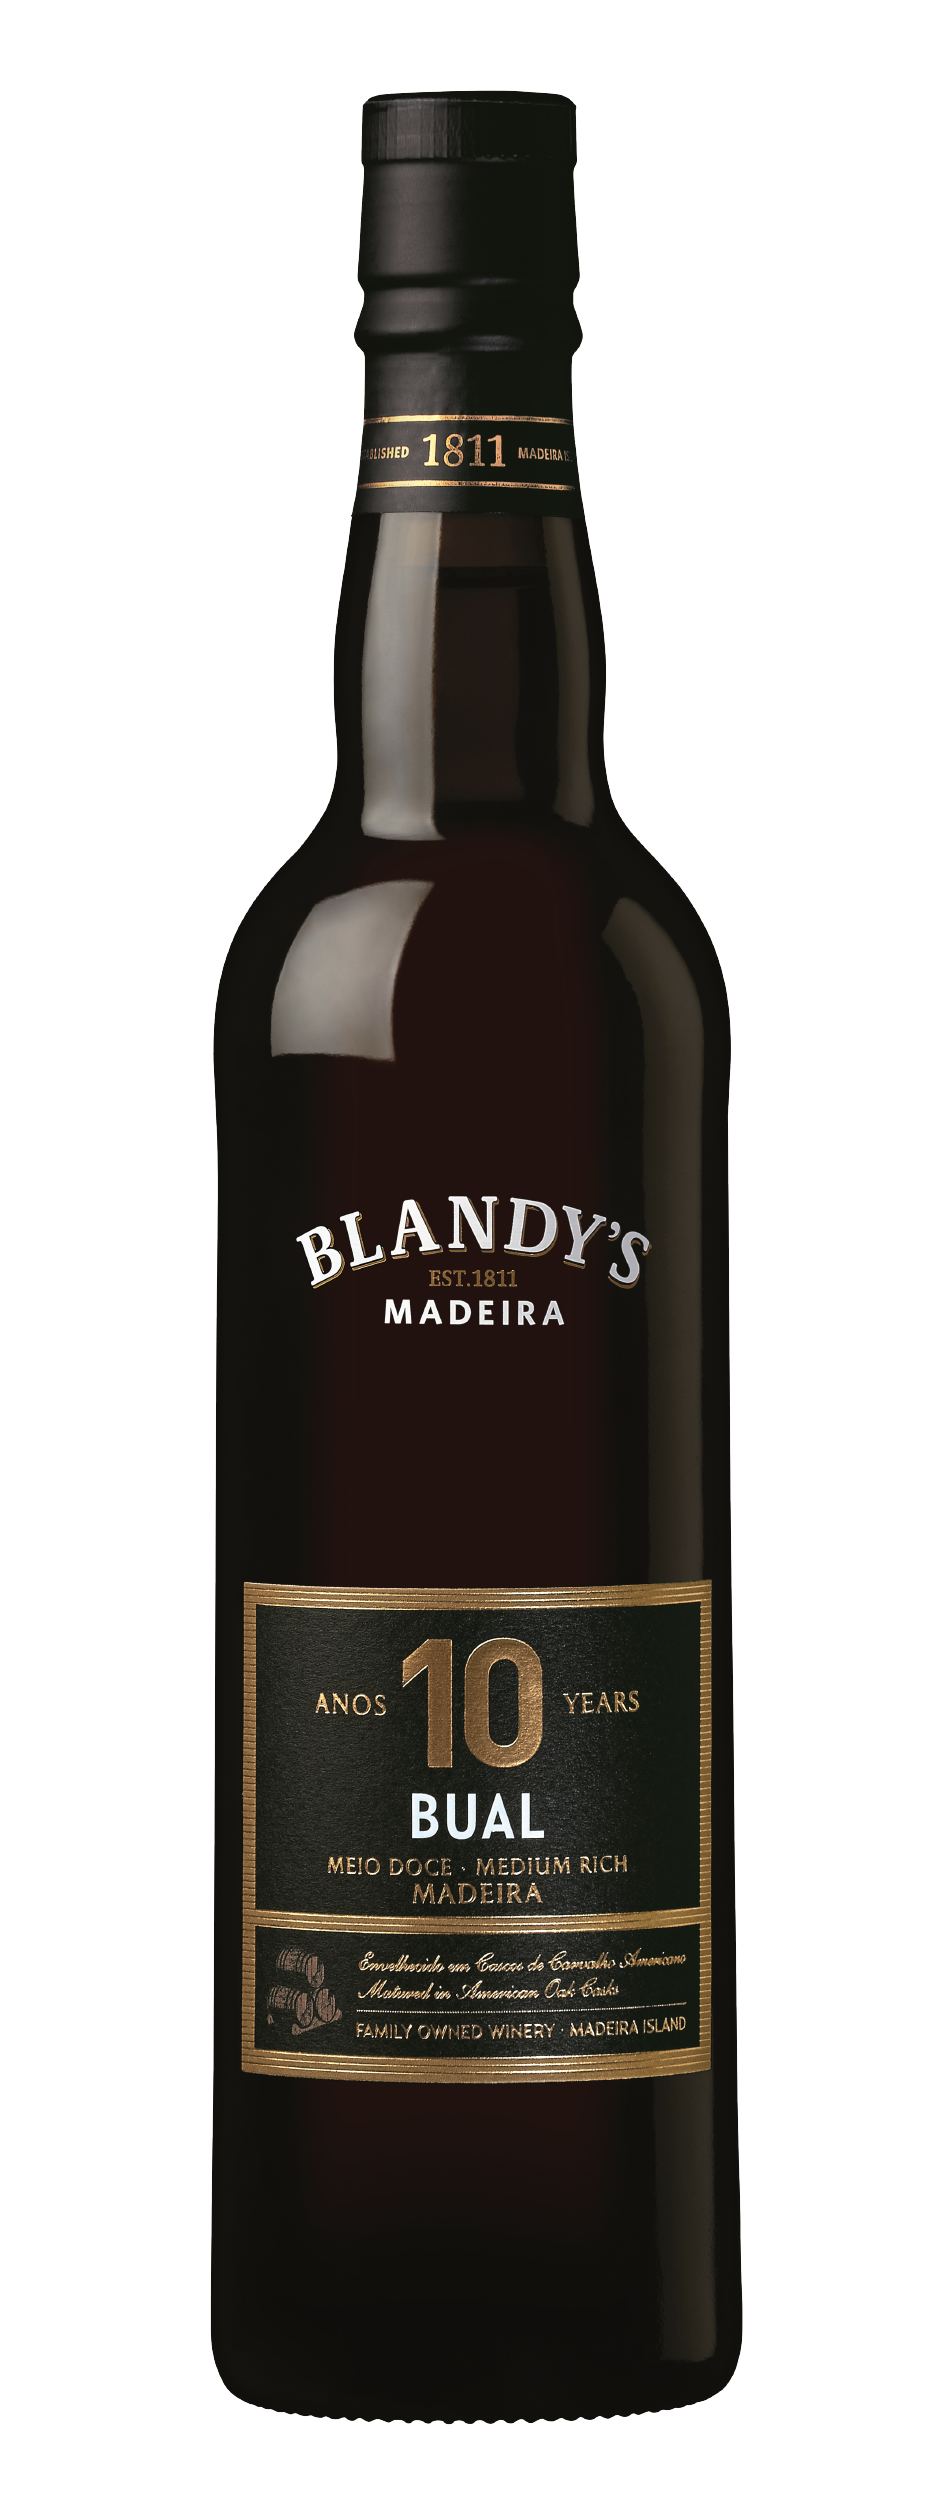 Product Image for BLANDY'S BUAL 10 YEAR OLD